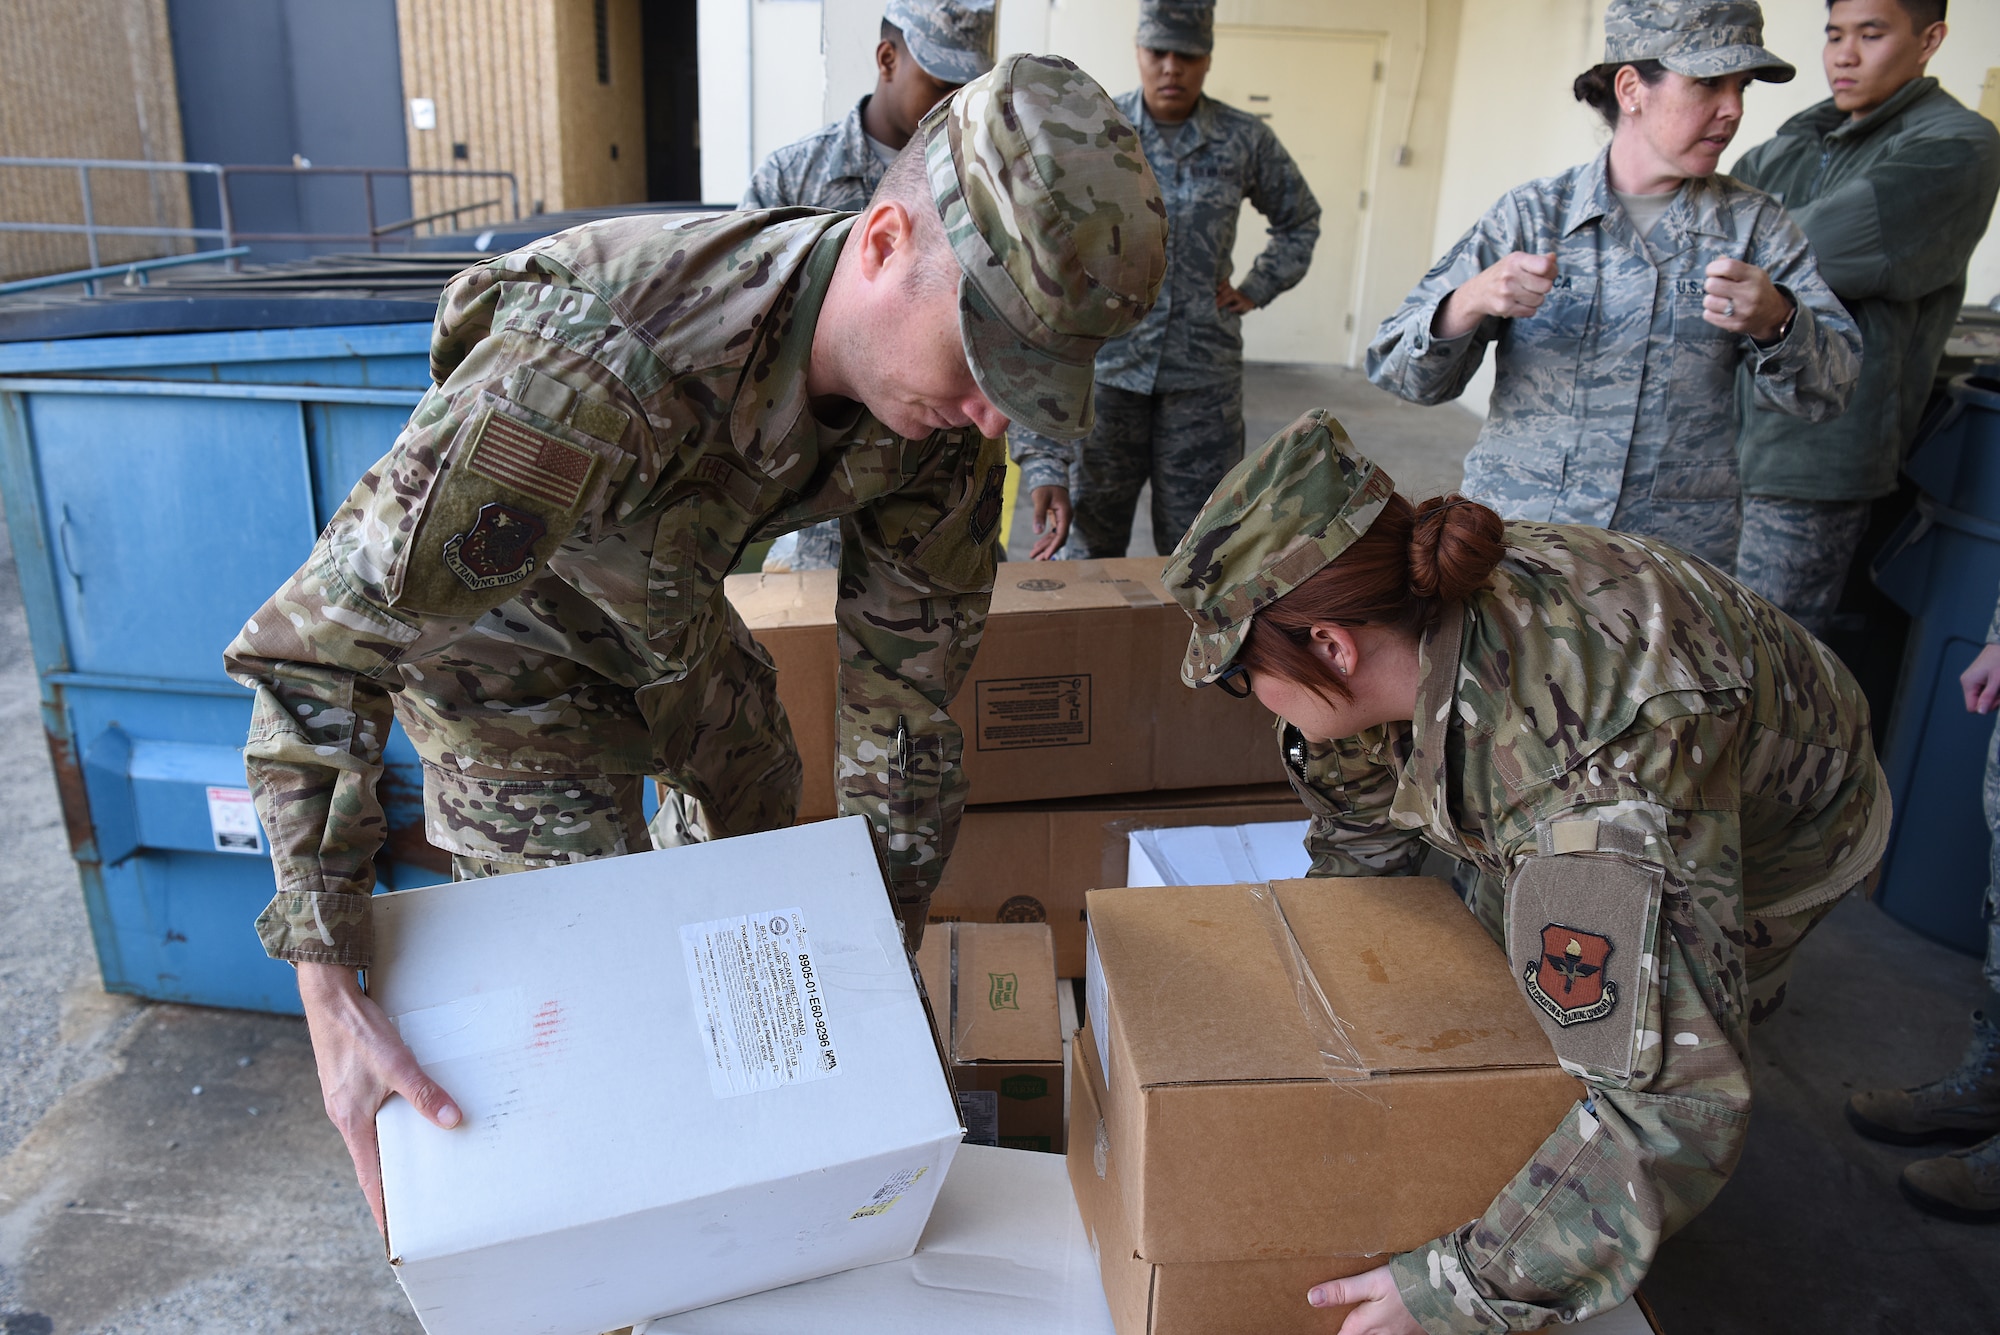 Airmen from the 81st Medical Group palletize food outside the Keesler Medical Center at Keesler Air Force Base, Mississippi, Nov. 18, 2019. Team Keesler was able to salvage and donate approximately 3,000 pounds of food to local food banks from a transit aircraft en route to Honduras, which landed at Keesler due to maintenance issues. (U.S. Air Force photo by Senior Airman Suzie Plotnikov)